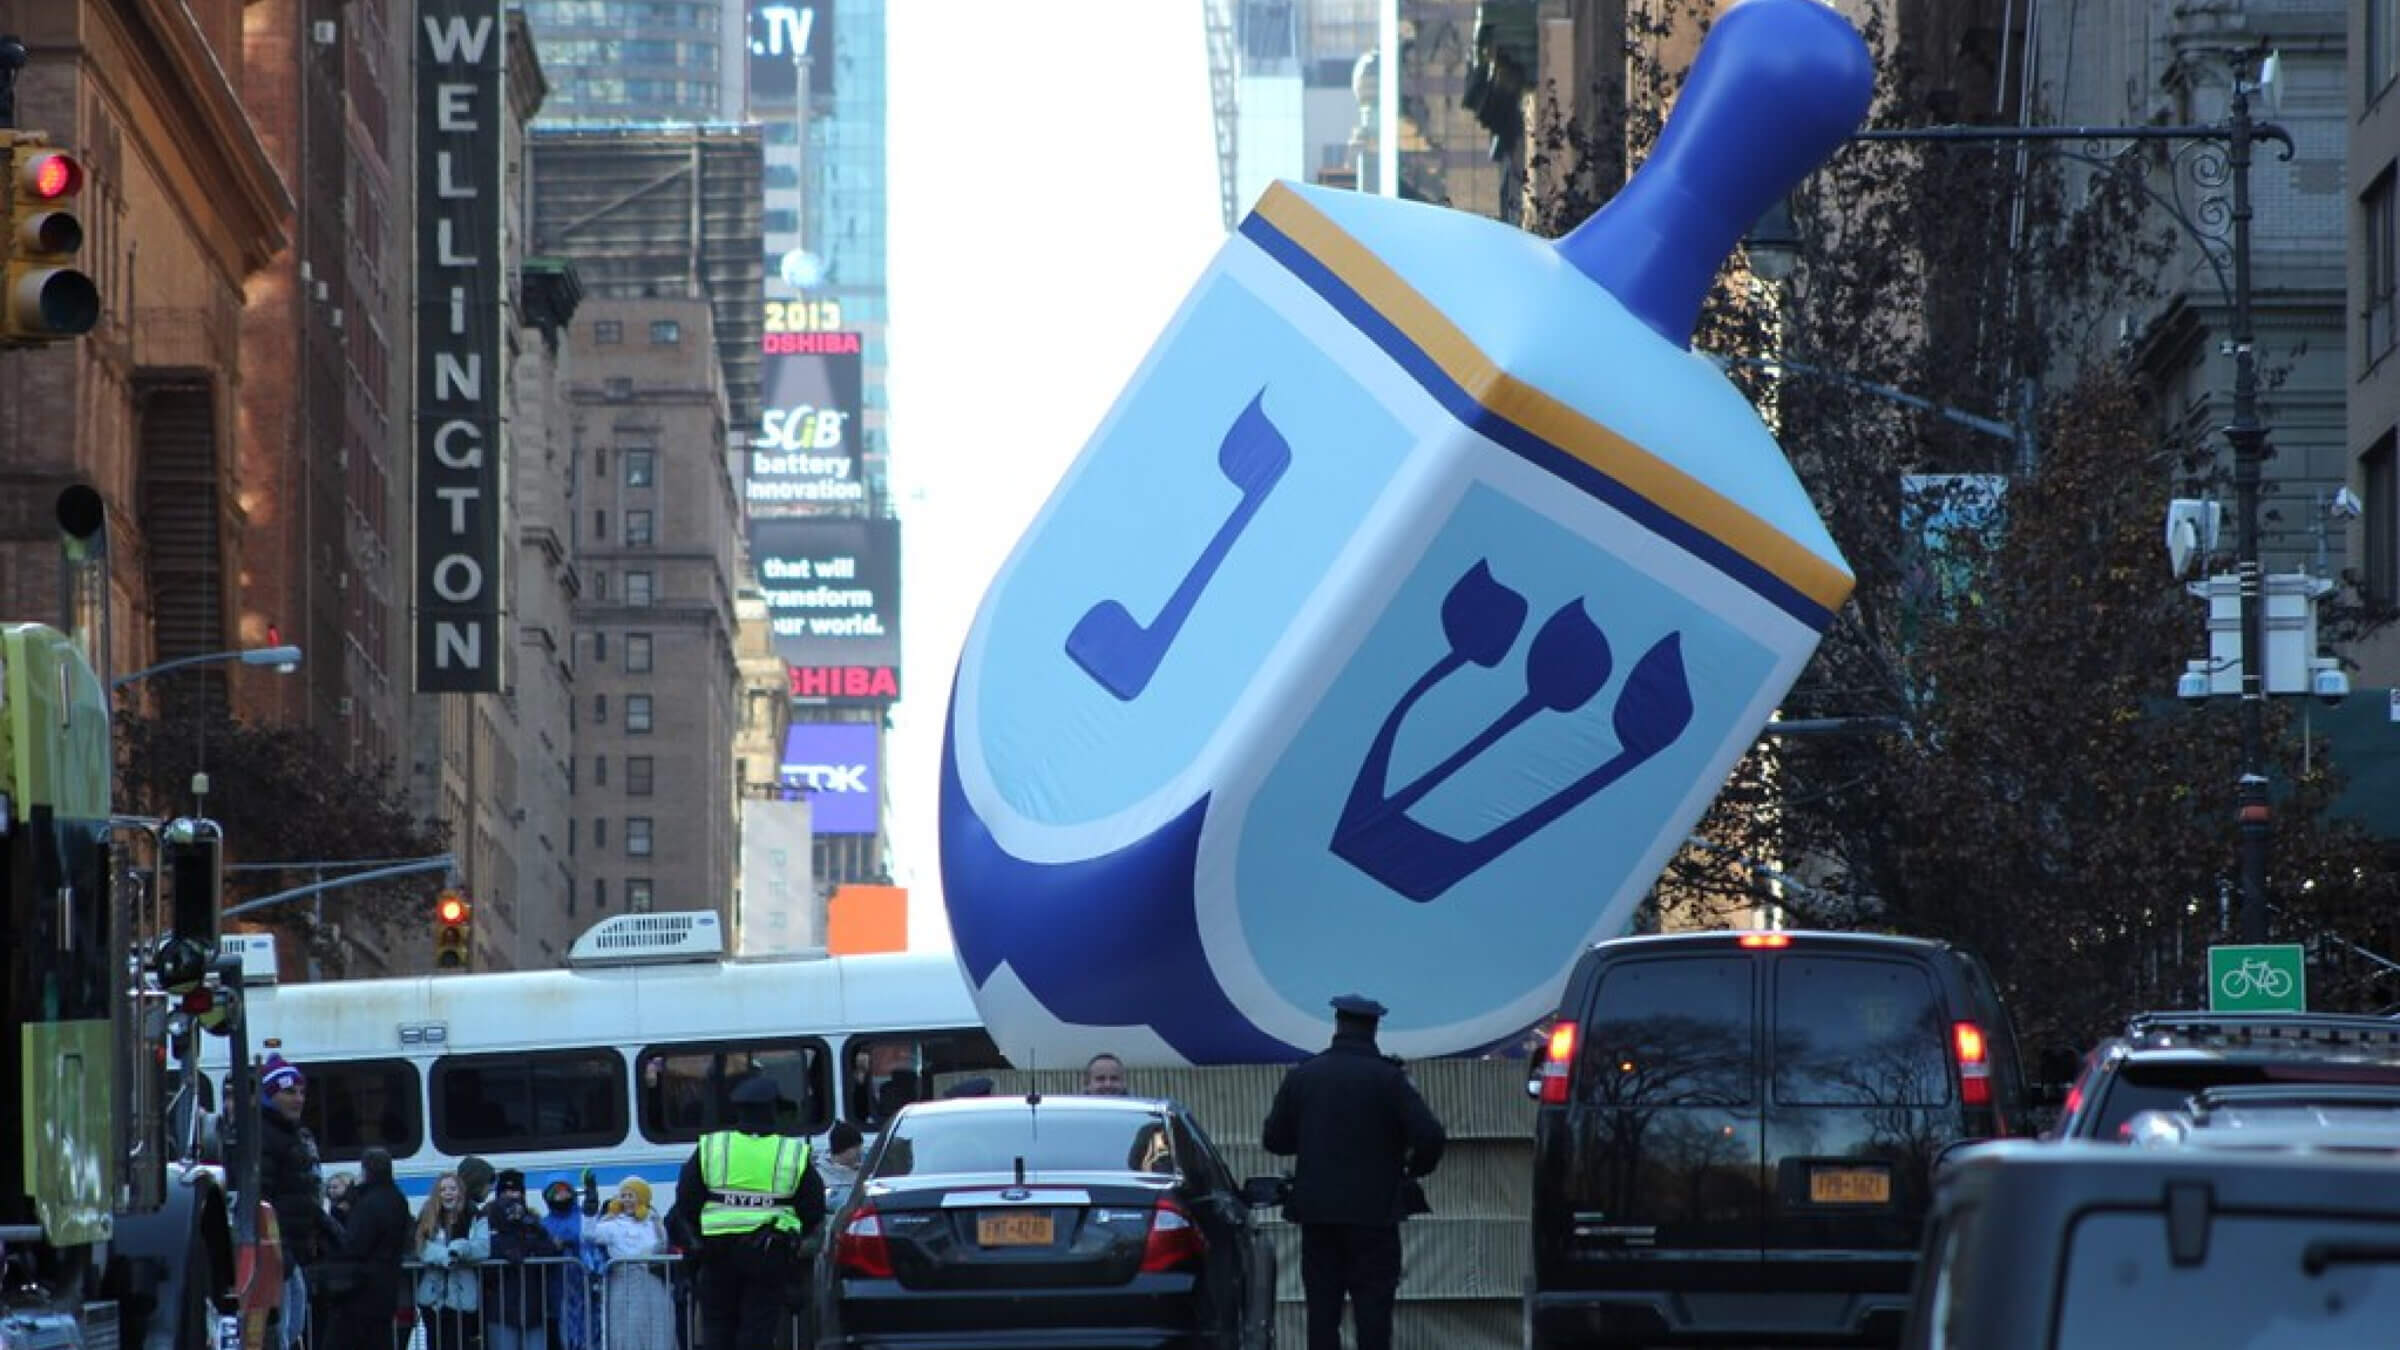 The dreidel "balloonicle" at the 2013 Macy's Thanksgiving Day Parade 